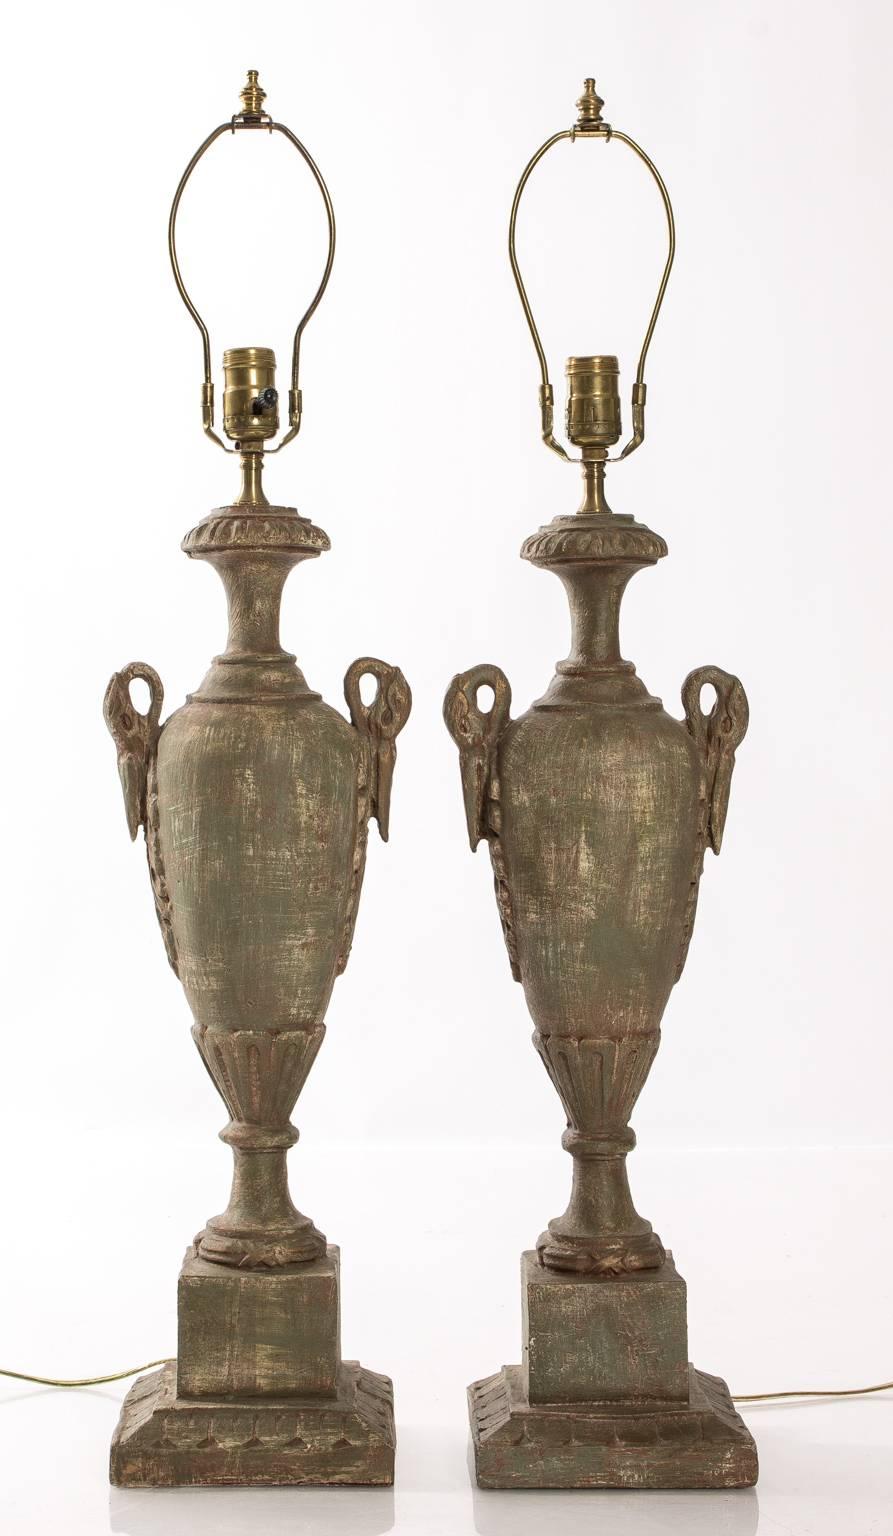 Neoclassical Pair of Urn Form Table Lamps